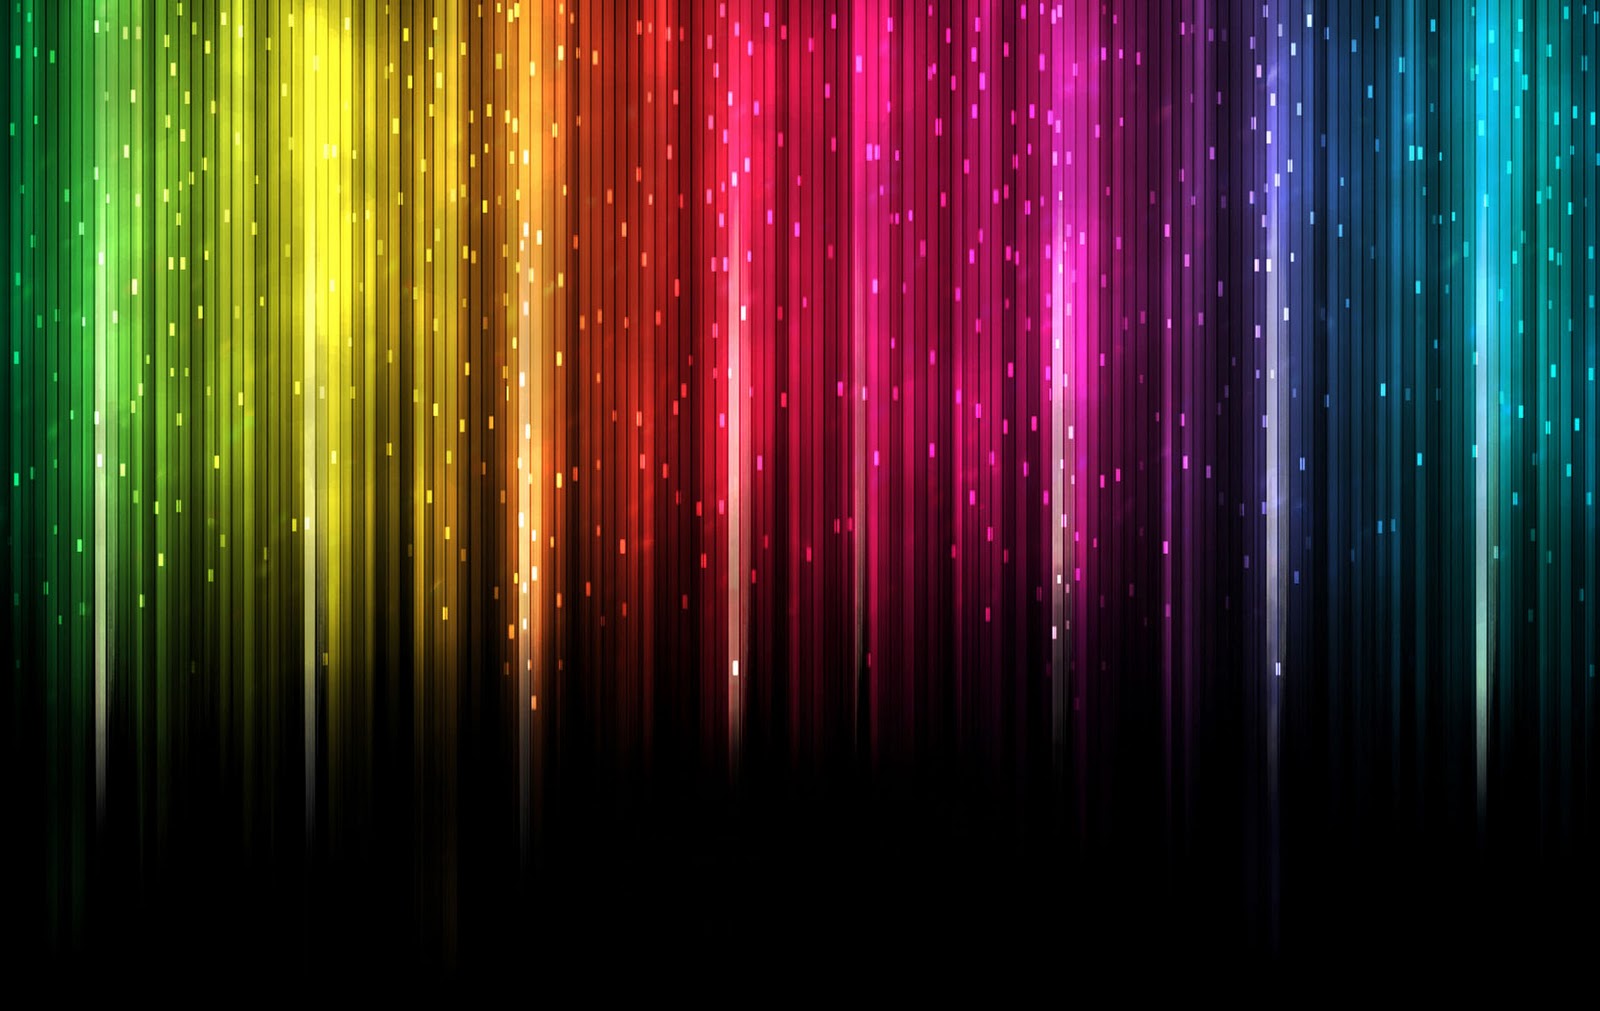 Gallery For Gt Unique Colorful Wallpaper